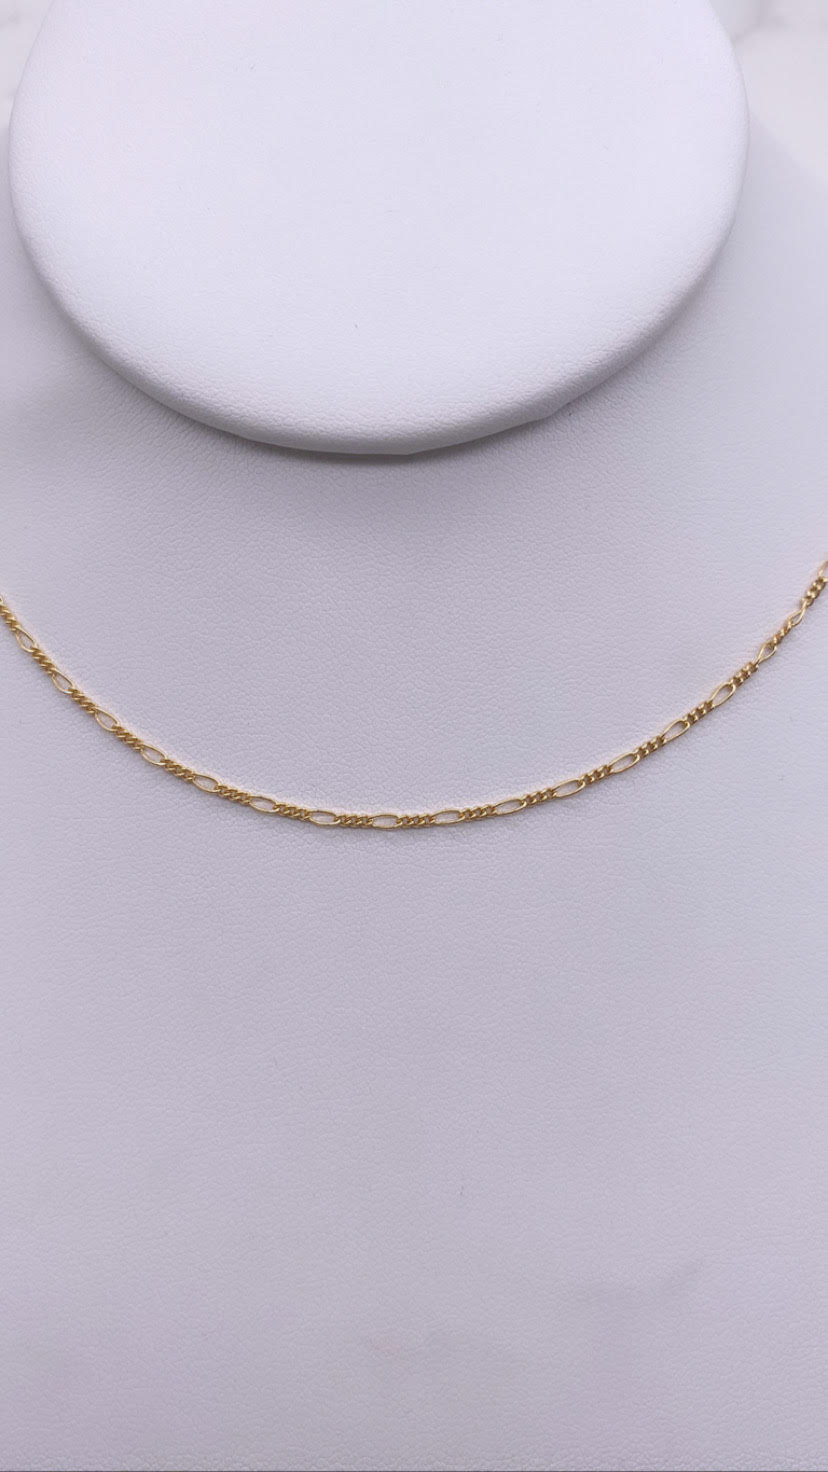 Mini Figaro Chain - Gold Filled - Dainty Every Day Chain